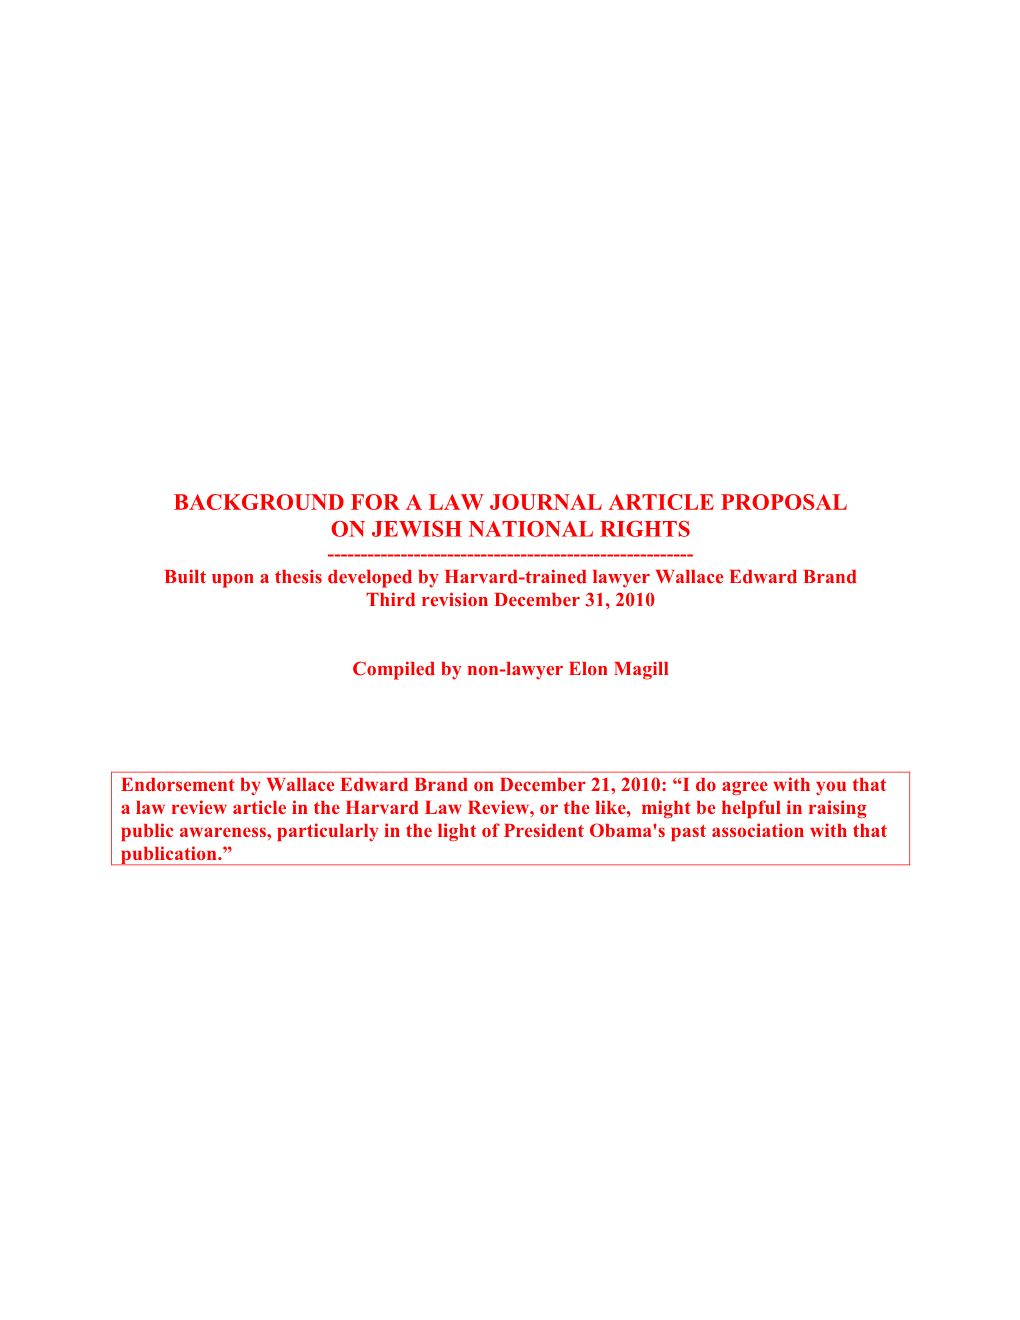 Background for a Law Journal Article Proposal